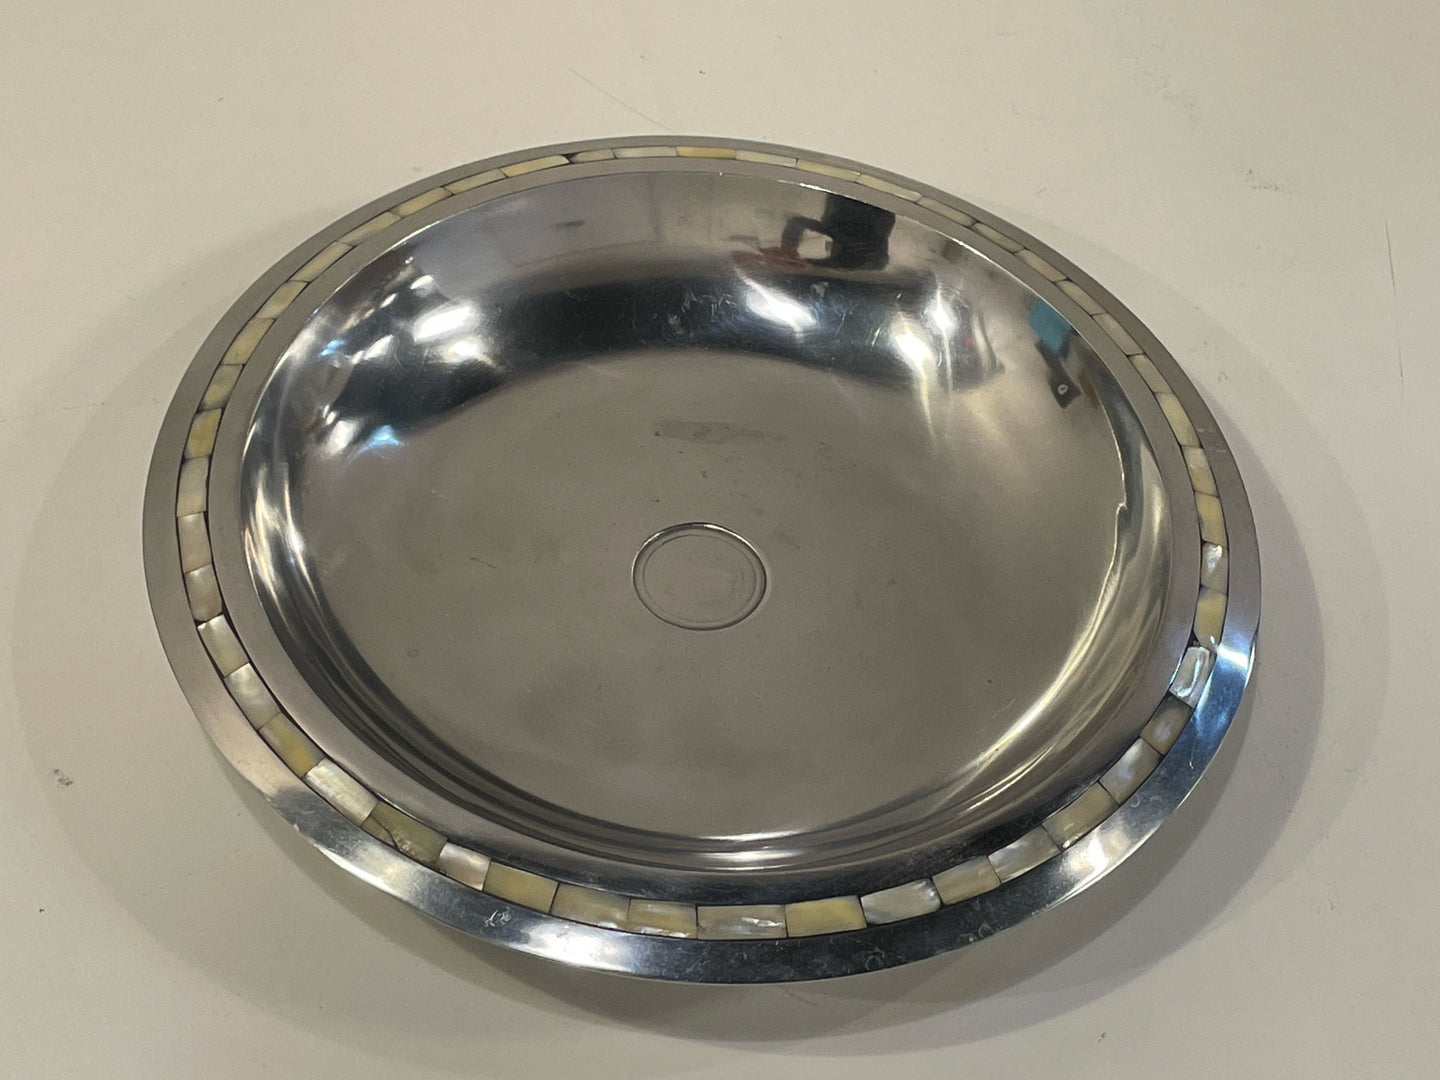 Pewter Bowl wit Mother of Pearl Inlay